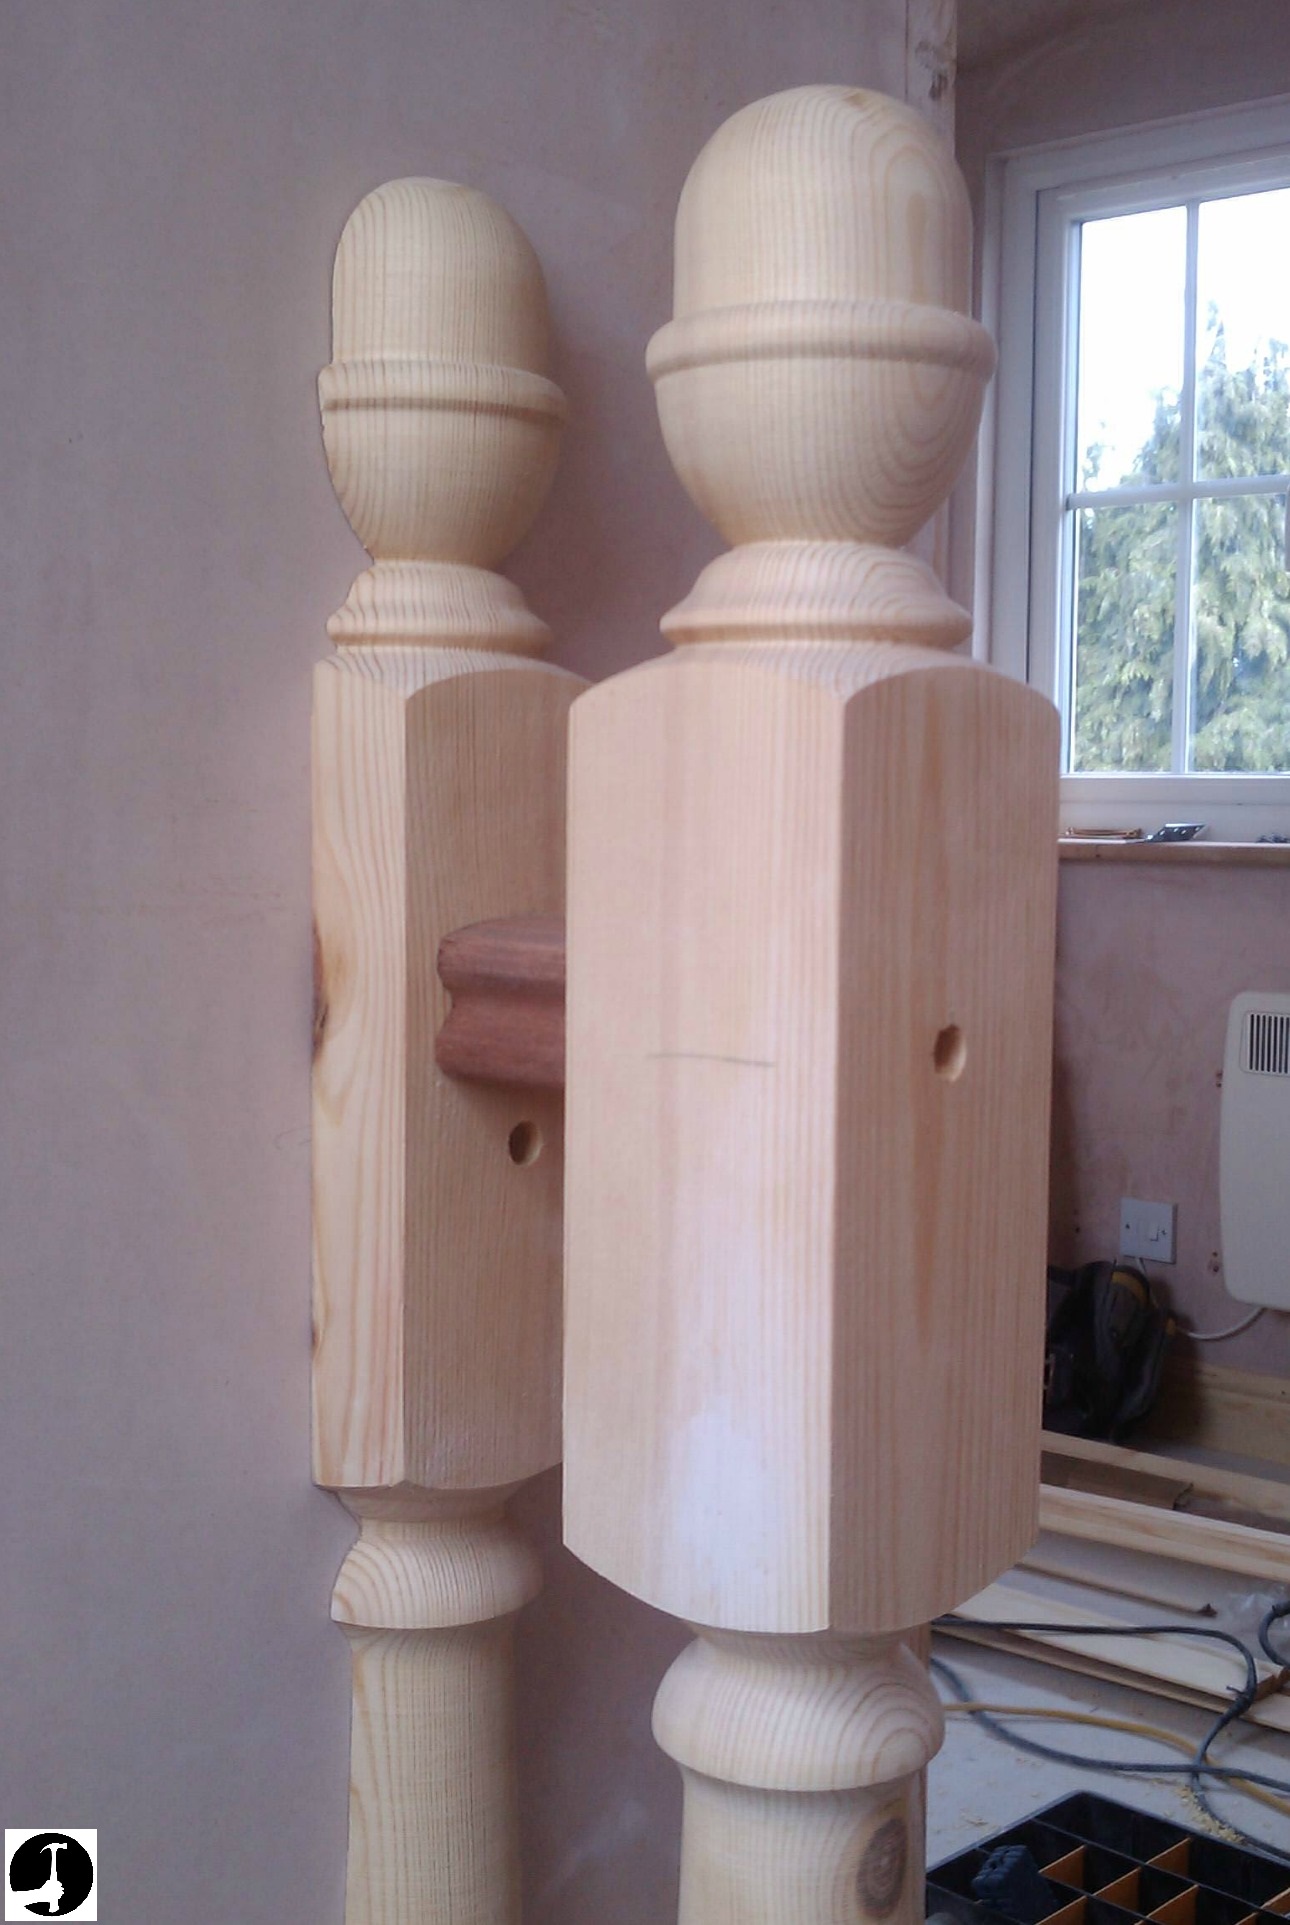 Fitting A Half Newel Post To The Wall To Finish Your Staircase Neatly